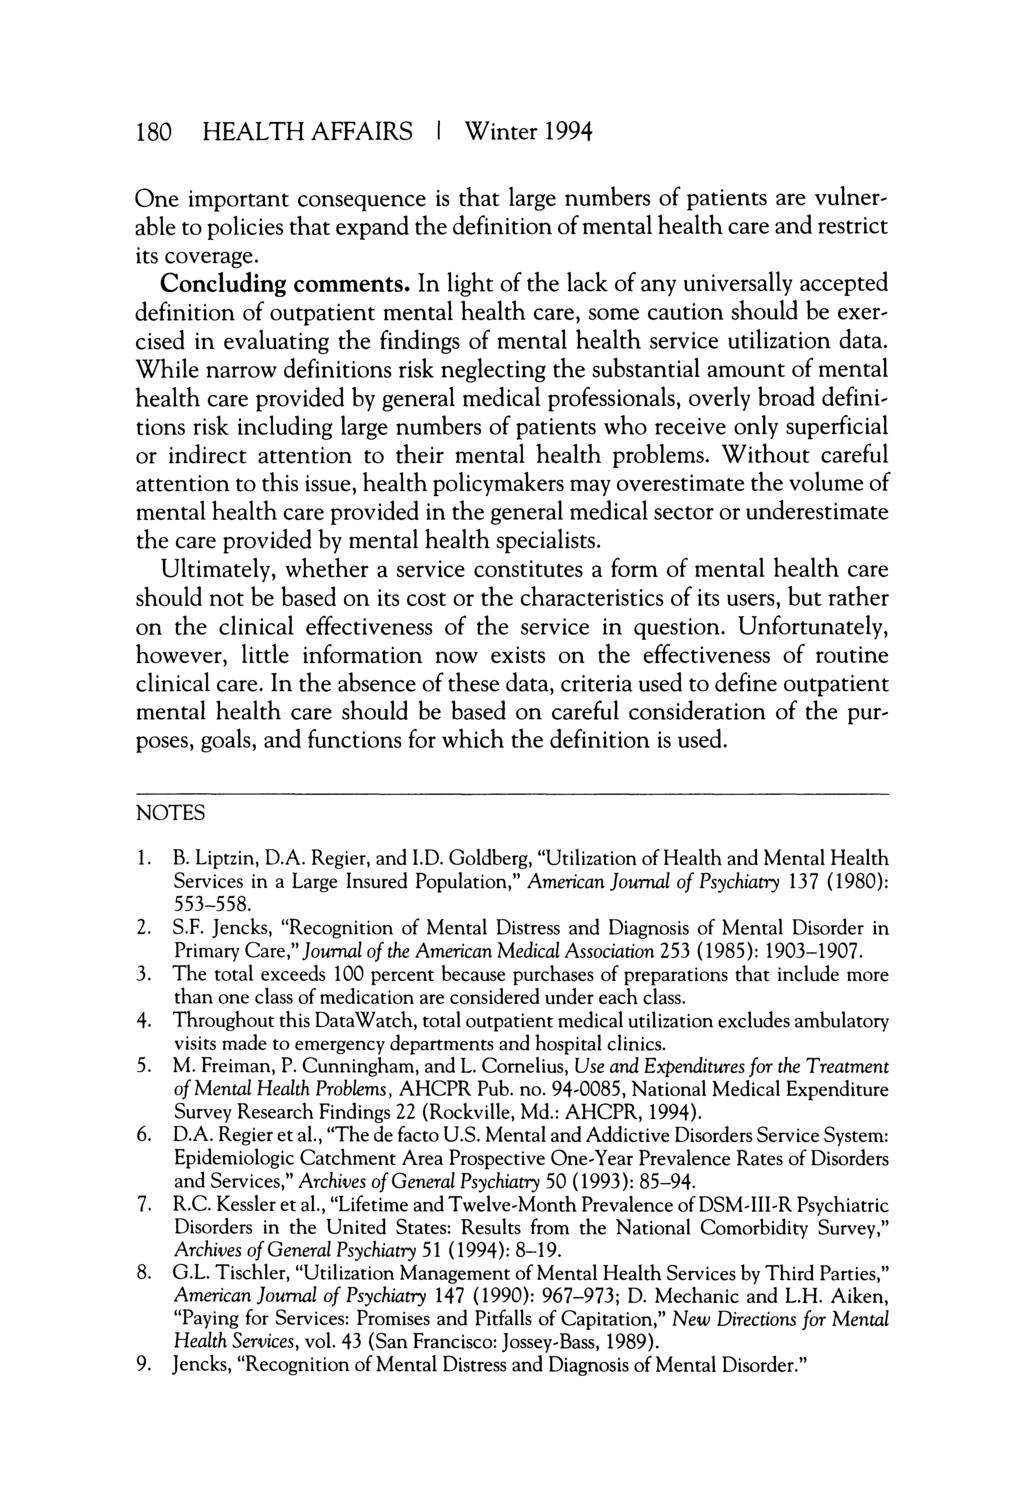 180 HEALTH AFFAIRS Winter 1994 One important consequence is that large numbers of patients are vulnerable to policies that expand the definition of mental health care and restrict its coverage.